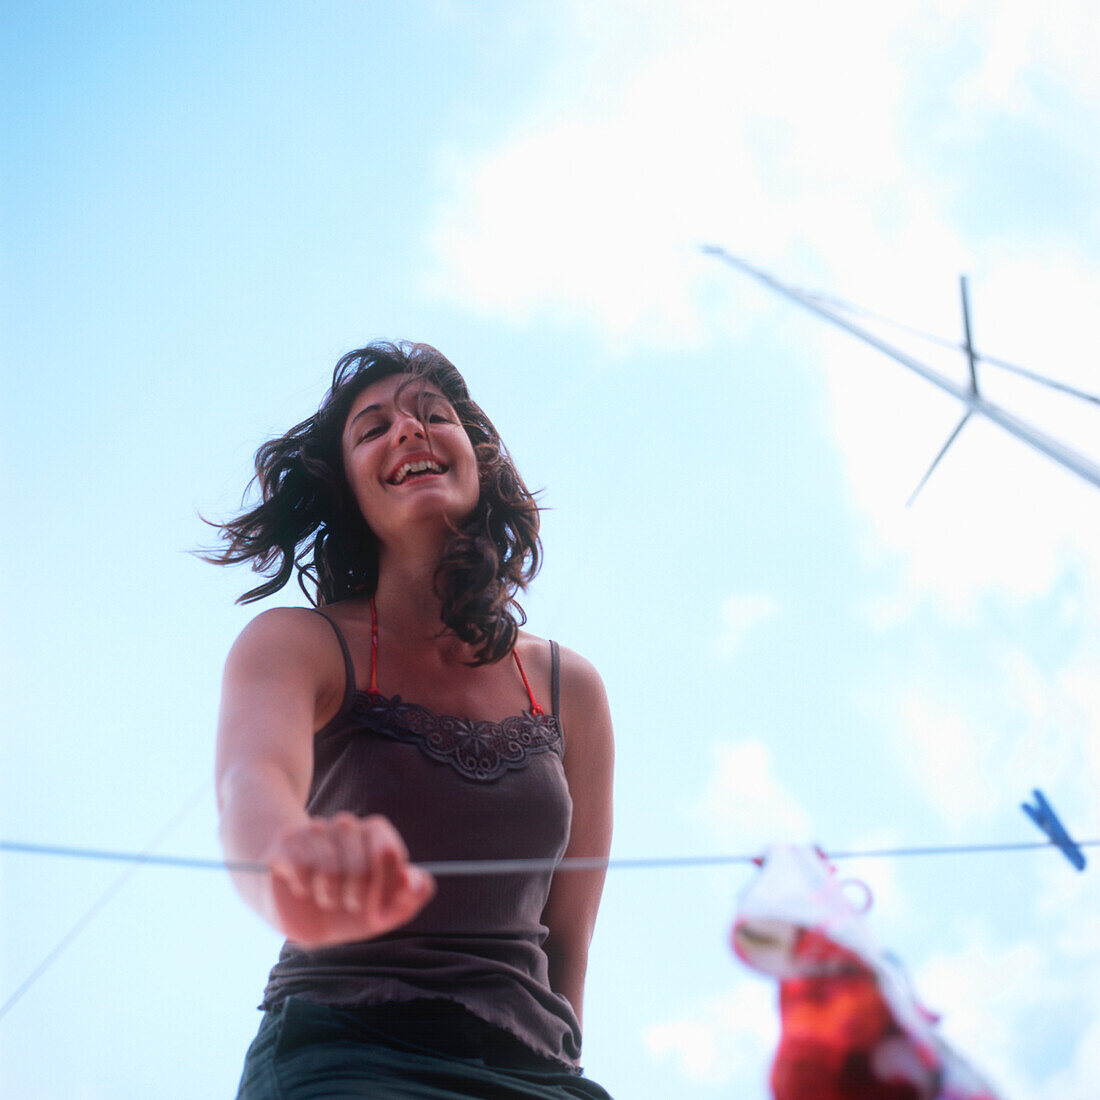 Woman standing on a sailboat and smiling at camera, portrait